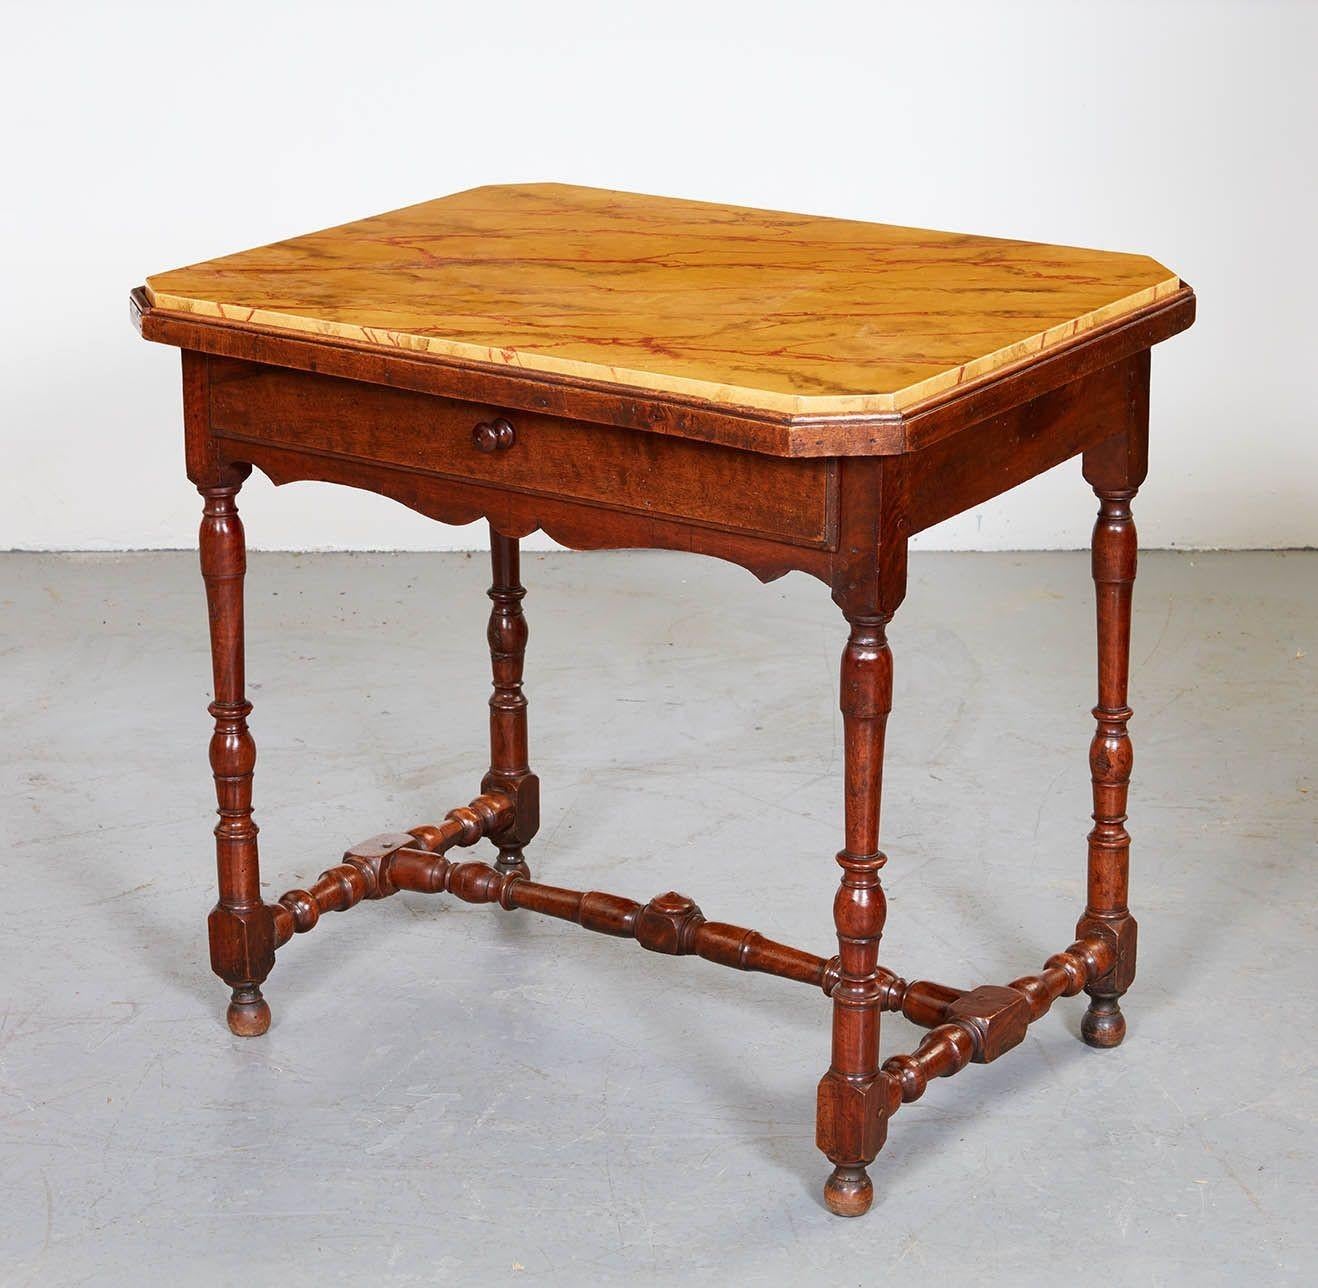 Good late 17th Century French walnut table with octagonal faux marble inset top over single drawer, the turned legs joined by turned 